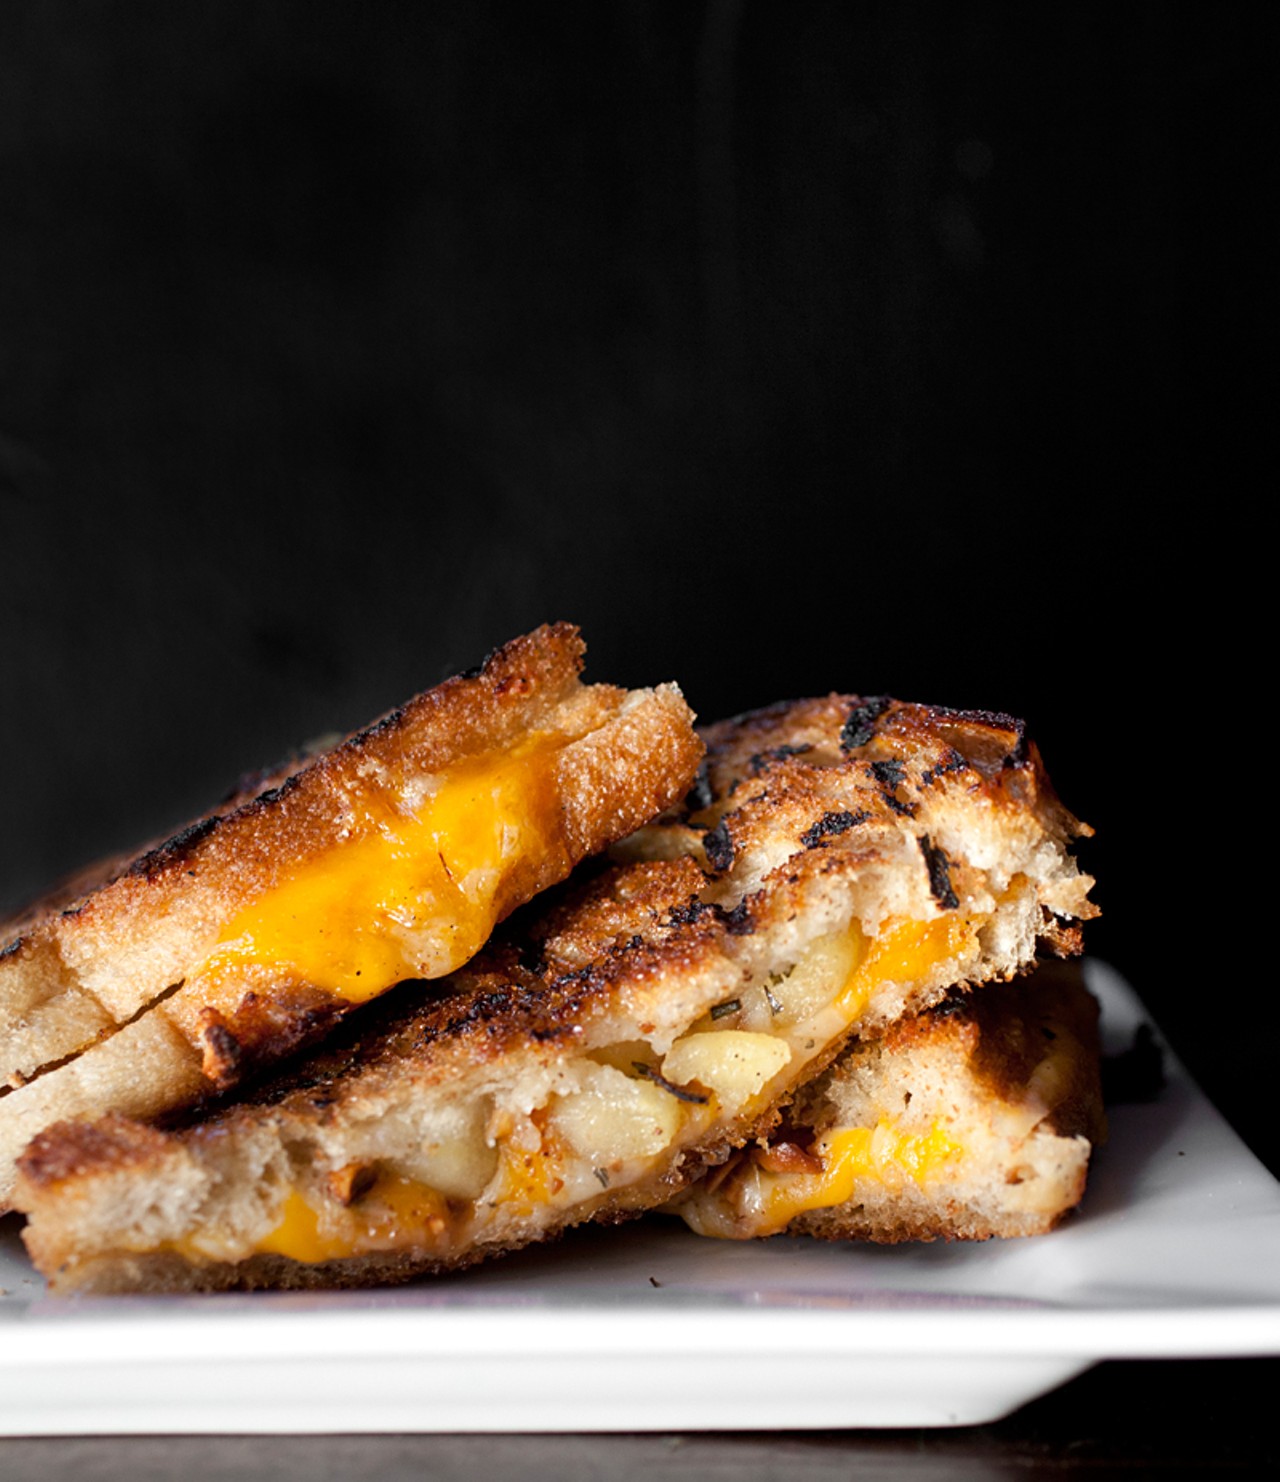 The Grilled Cheese is cheddar, smoked mozzarella, apple rosemary compote, hazelnut, honey and Companion pugliese.